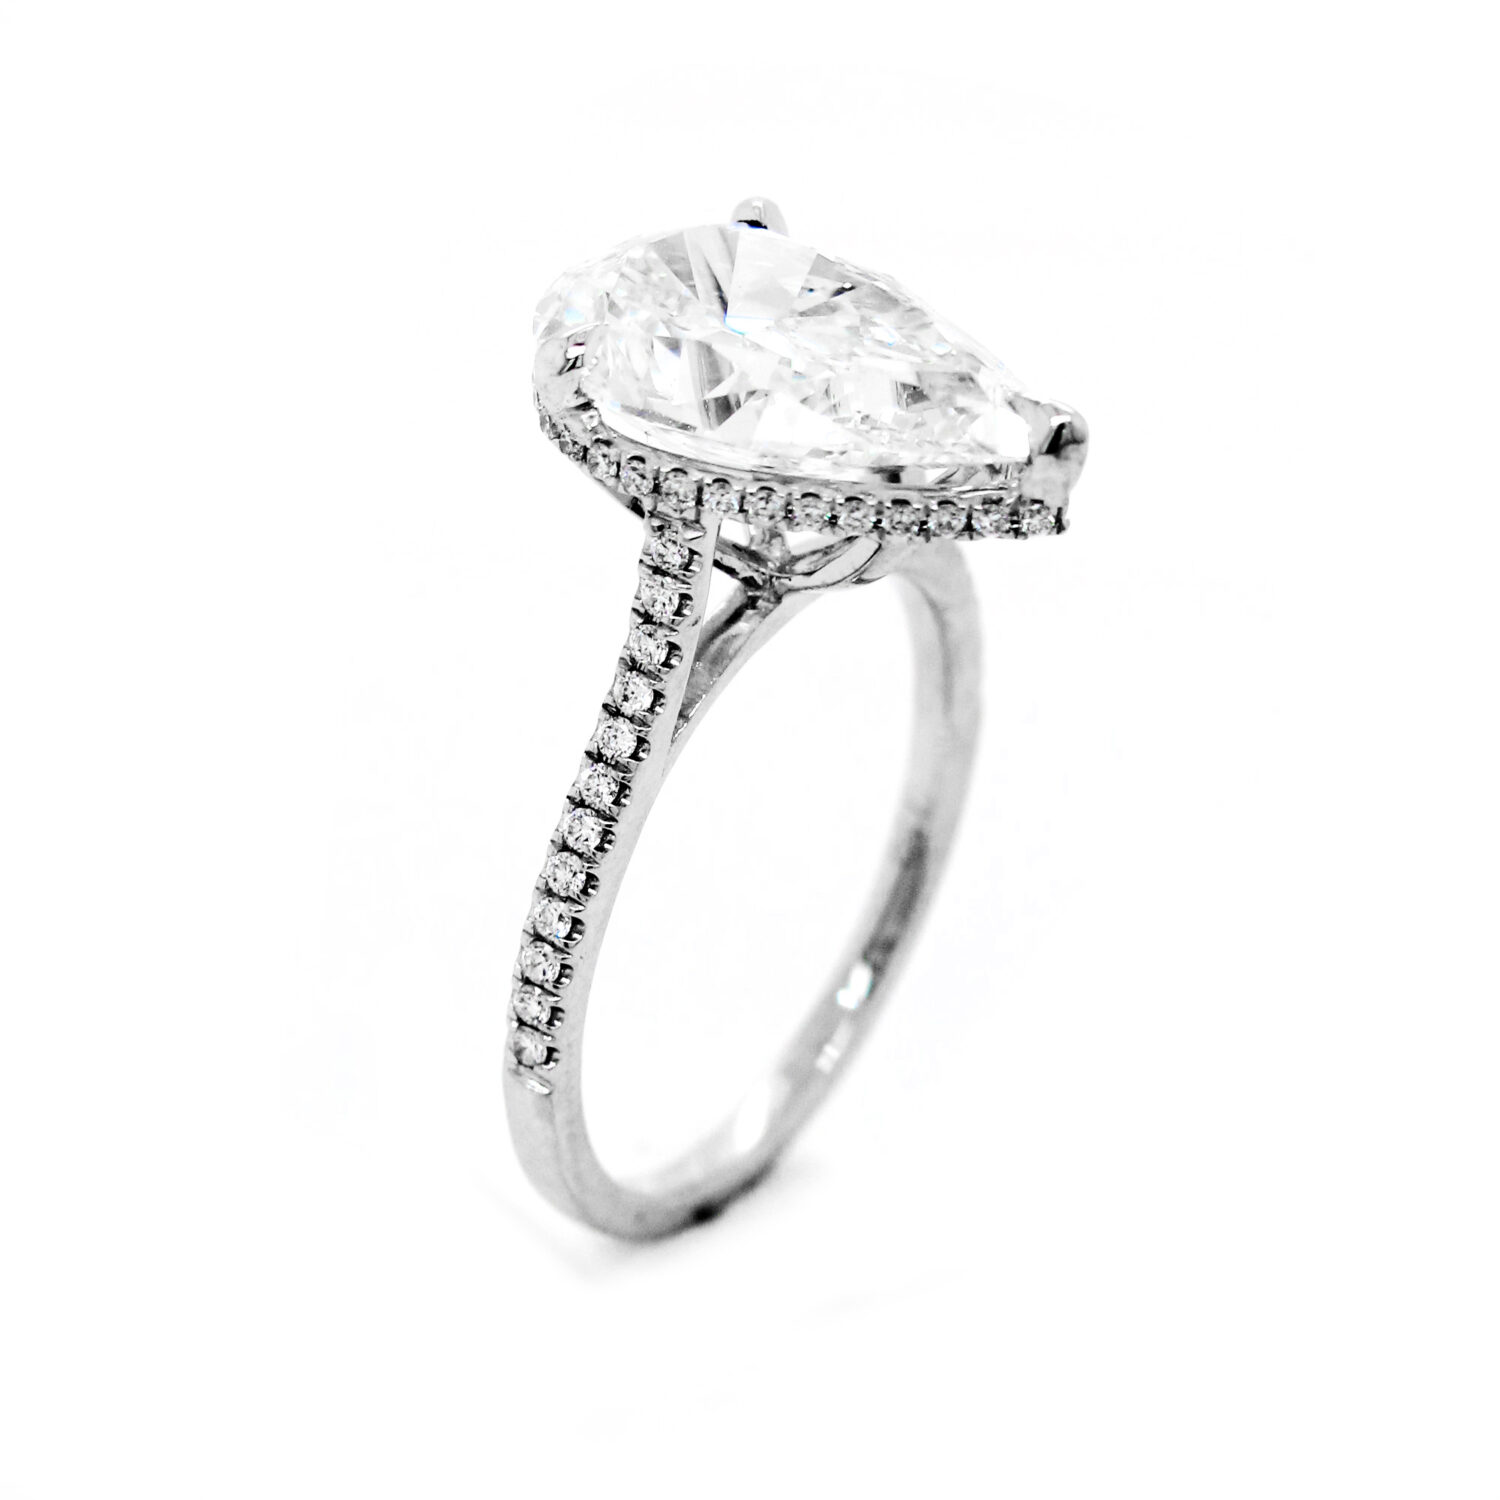 Pear Shape Engagement Ring - Richards Gems and Jewelry